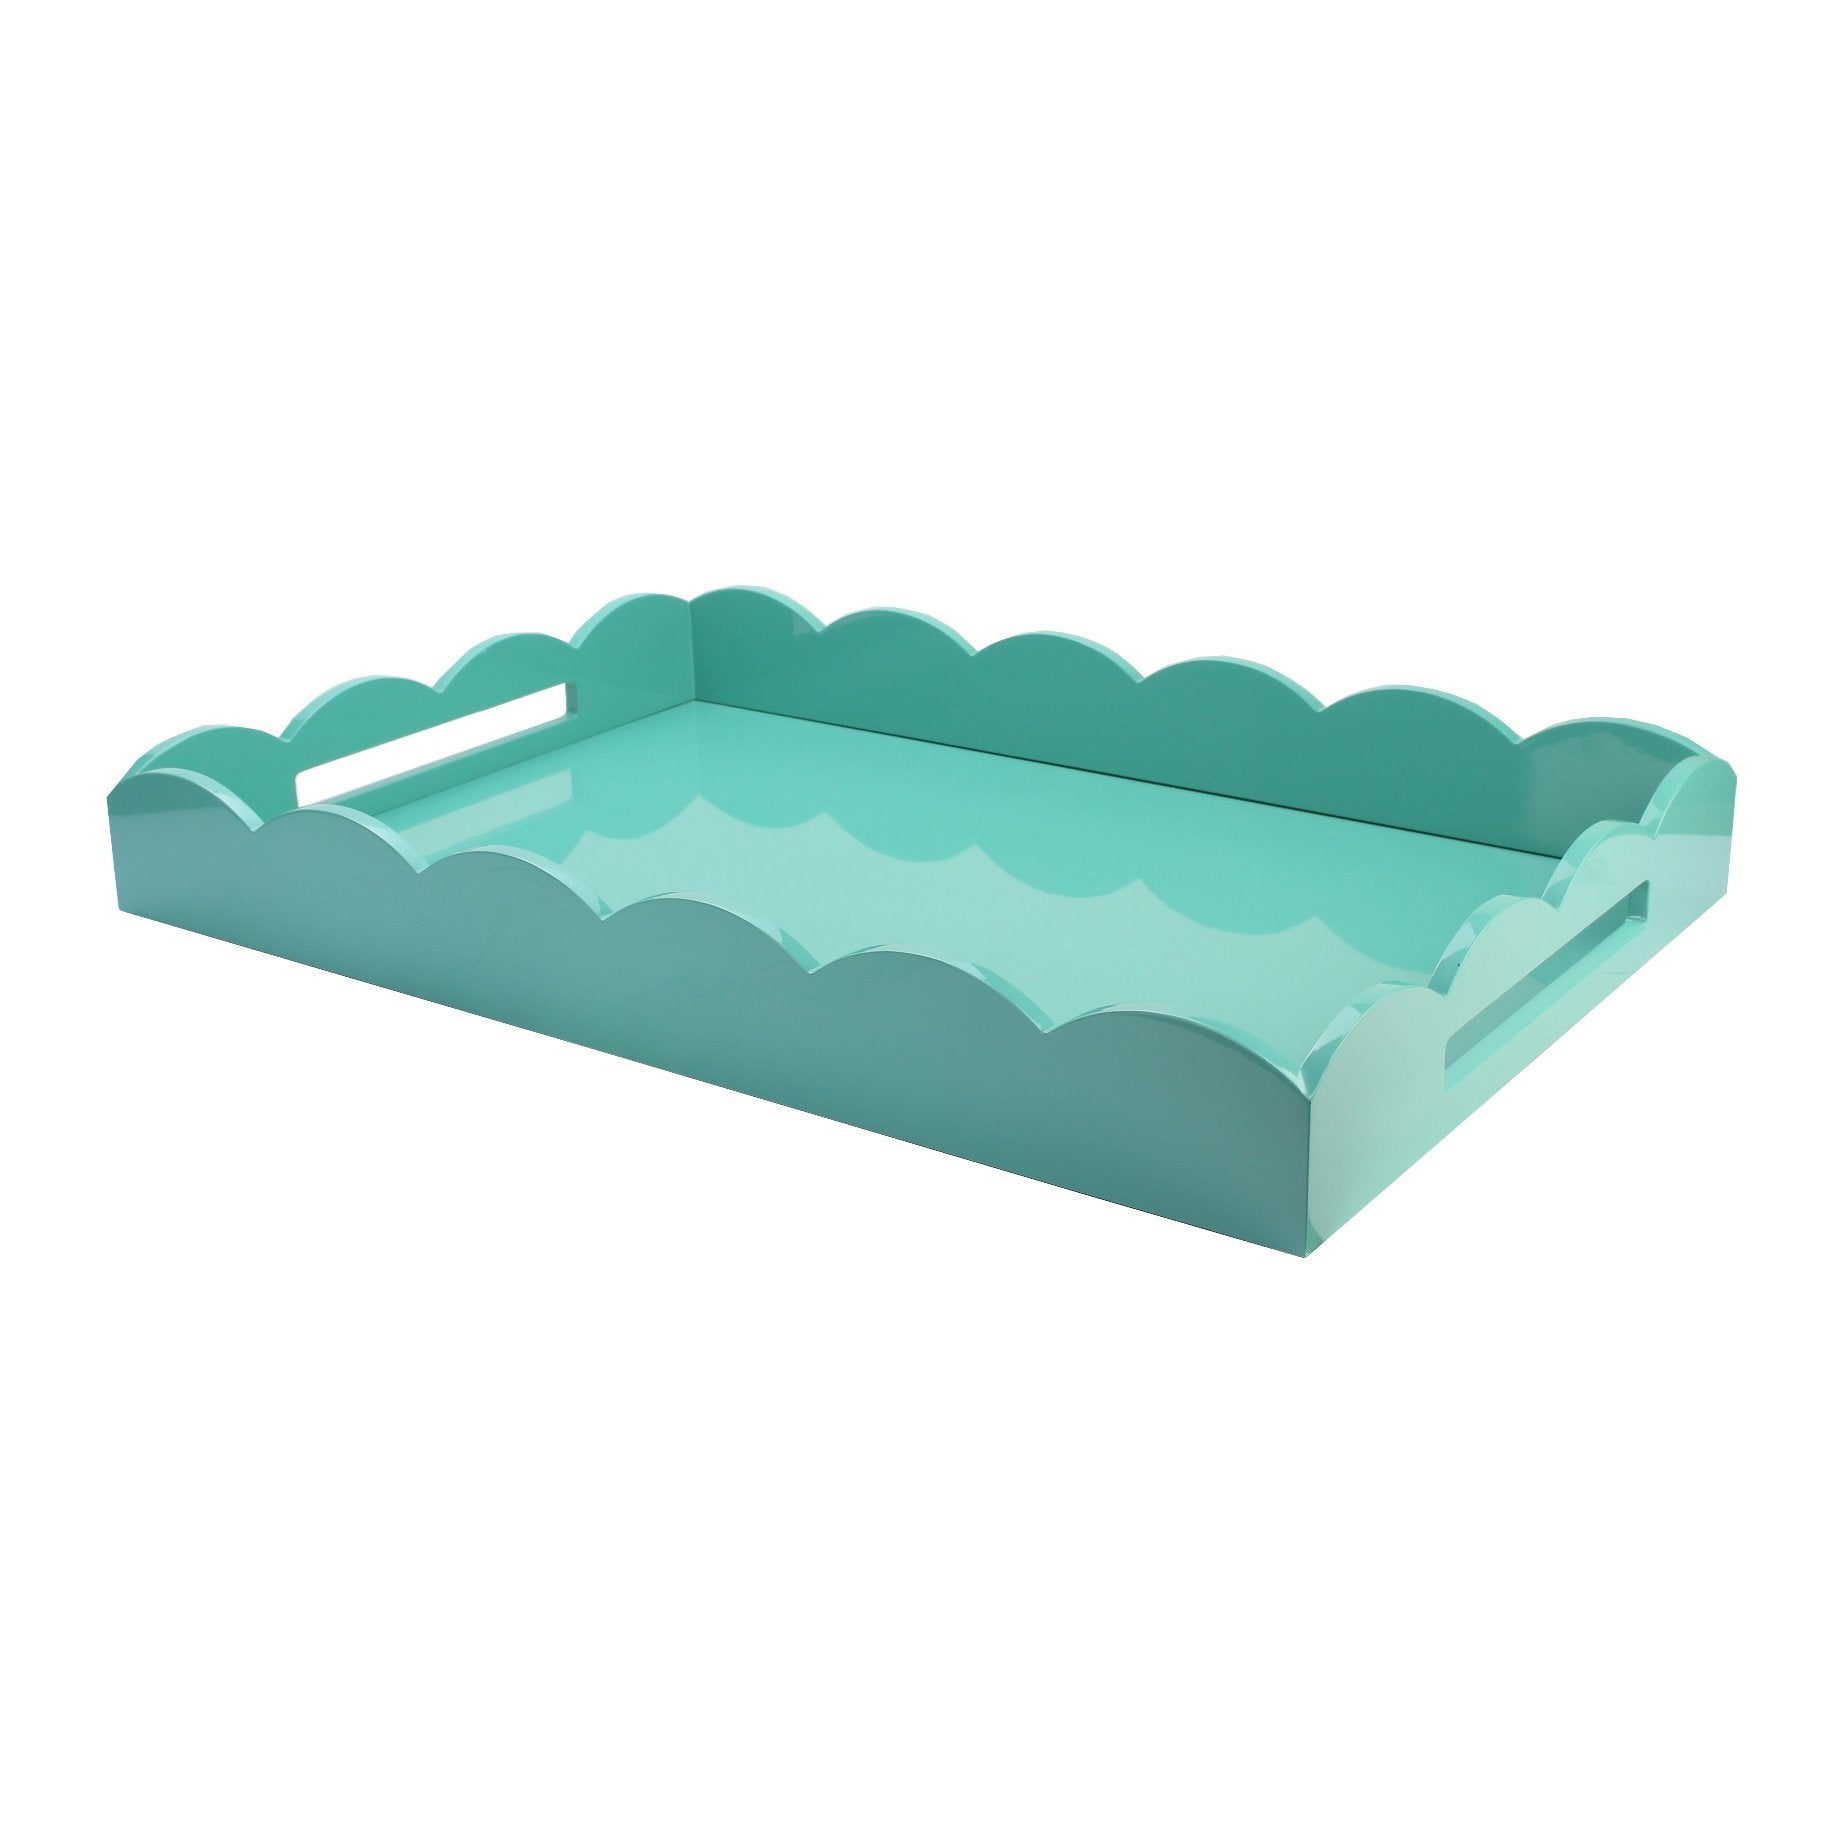 Turquoise Large Lacquered Scallop Ottoman Tray - Addison Ross Ltd UK